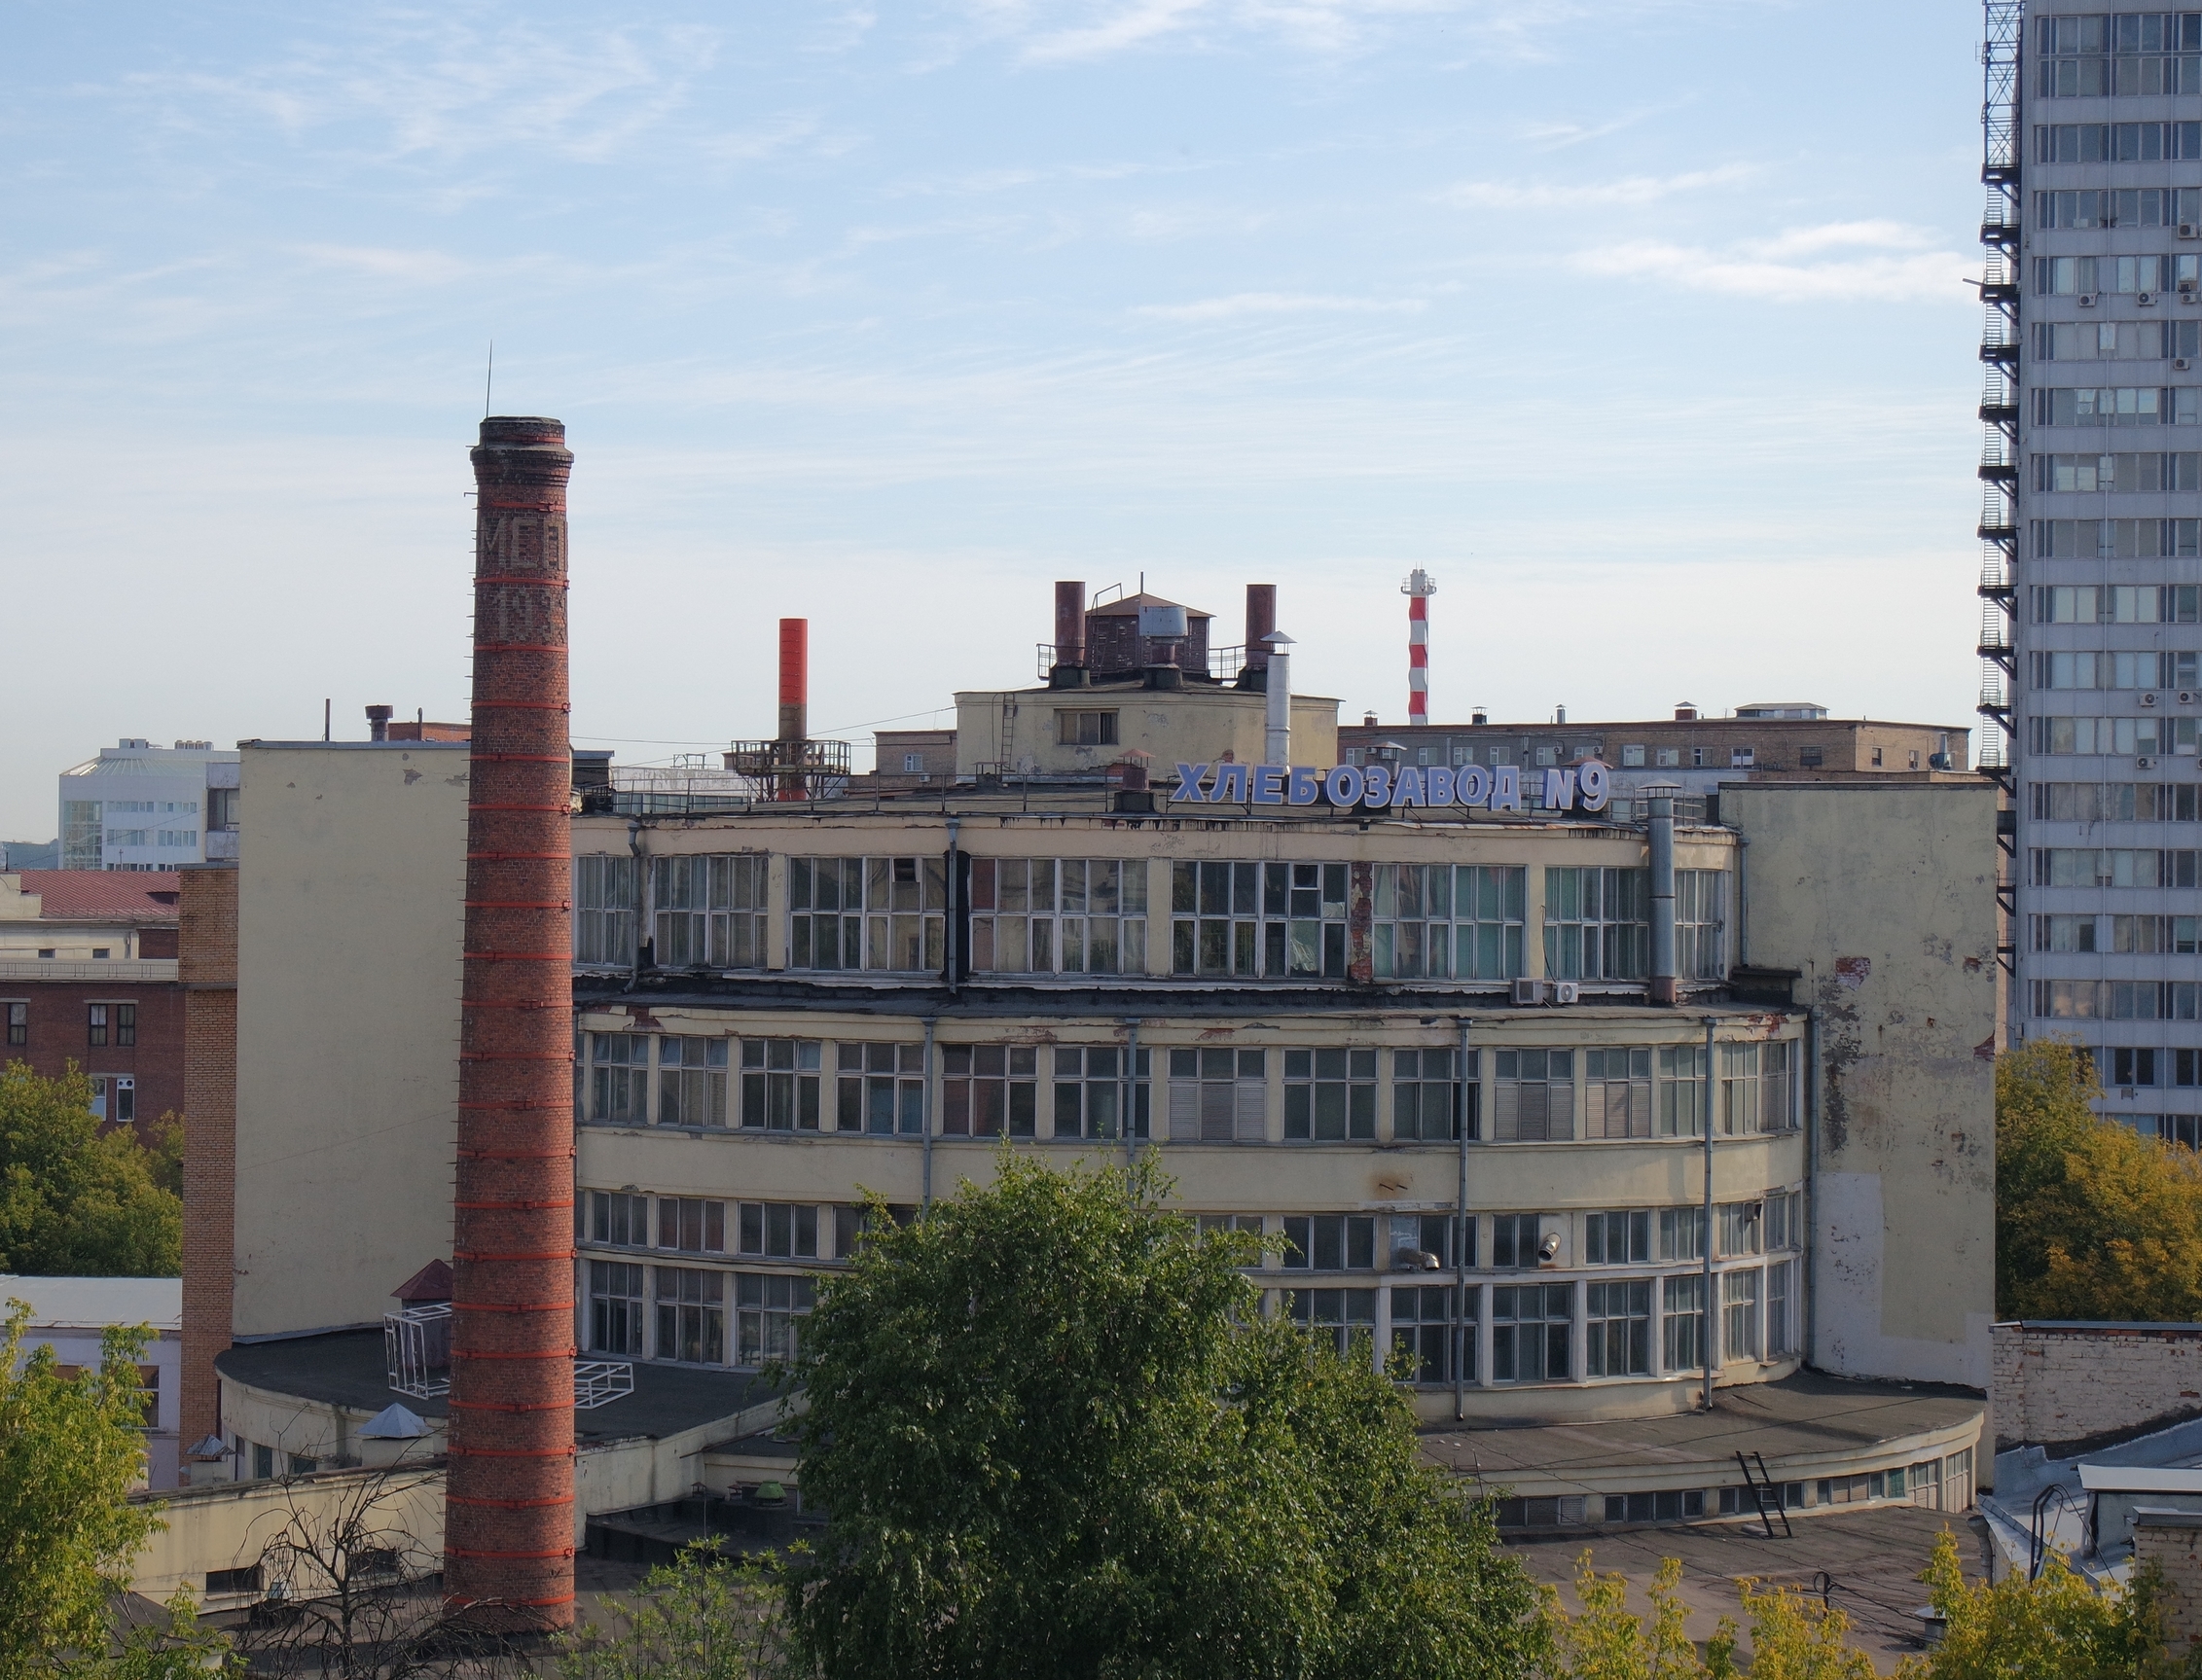 Khlebozavod (Bread Factory) No. 9 in Moscow